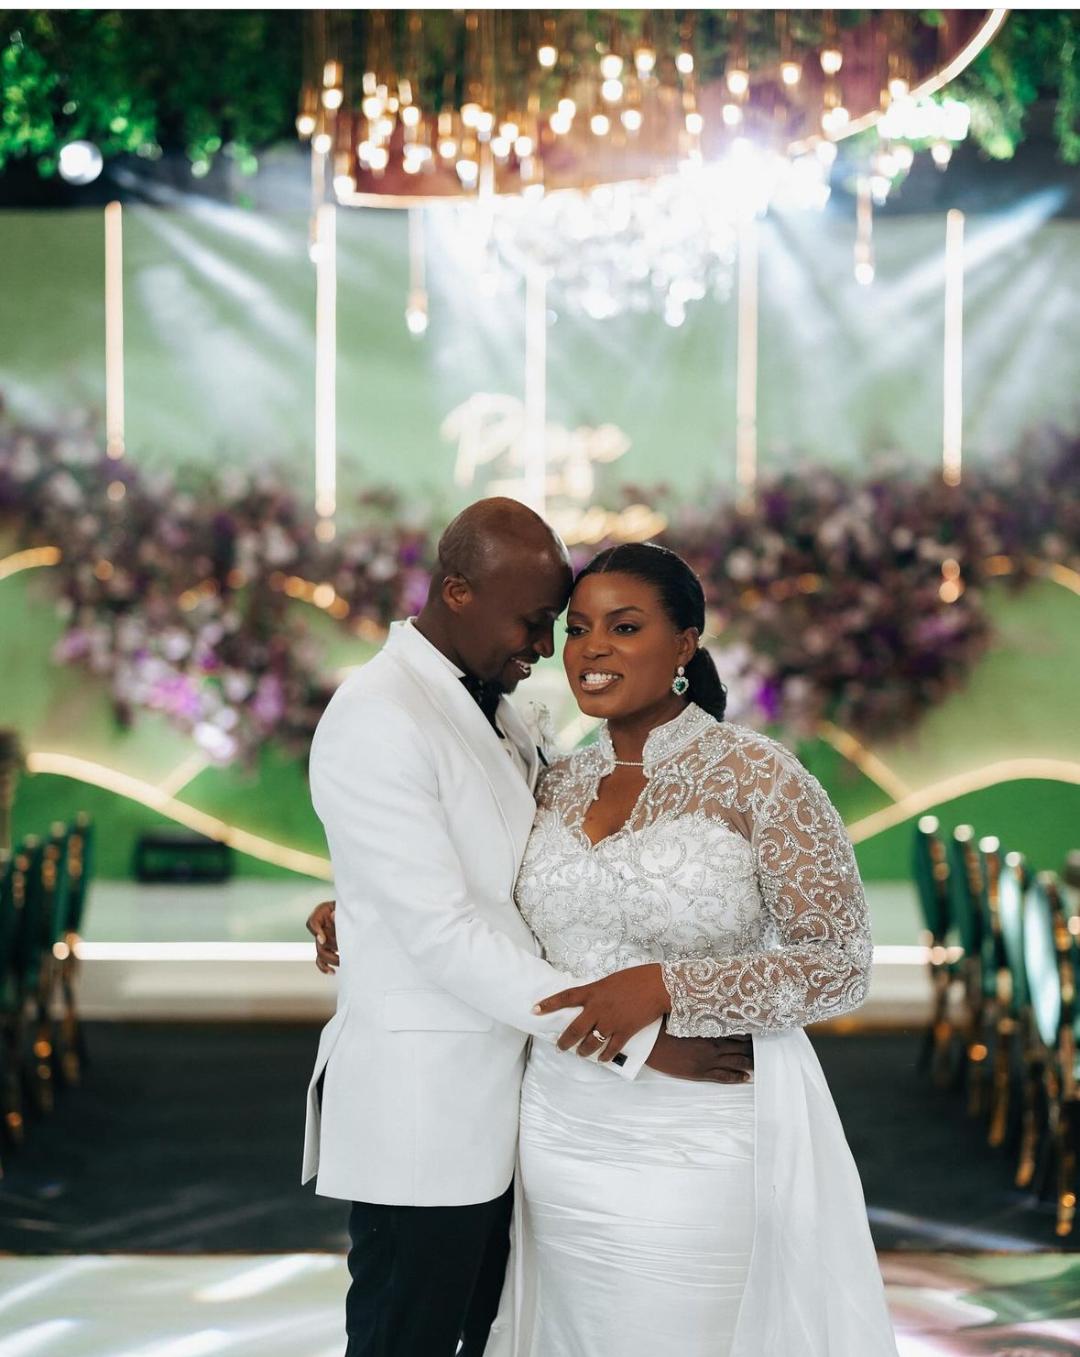 Irene Logan sings 'At Last' as she dances with her husband at their wedding reception